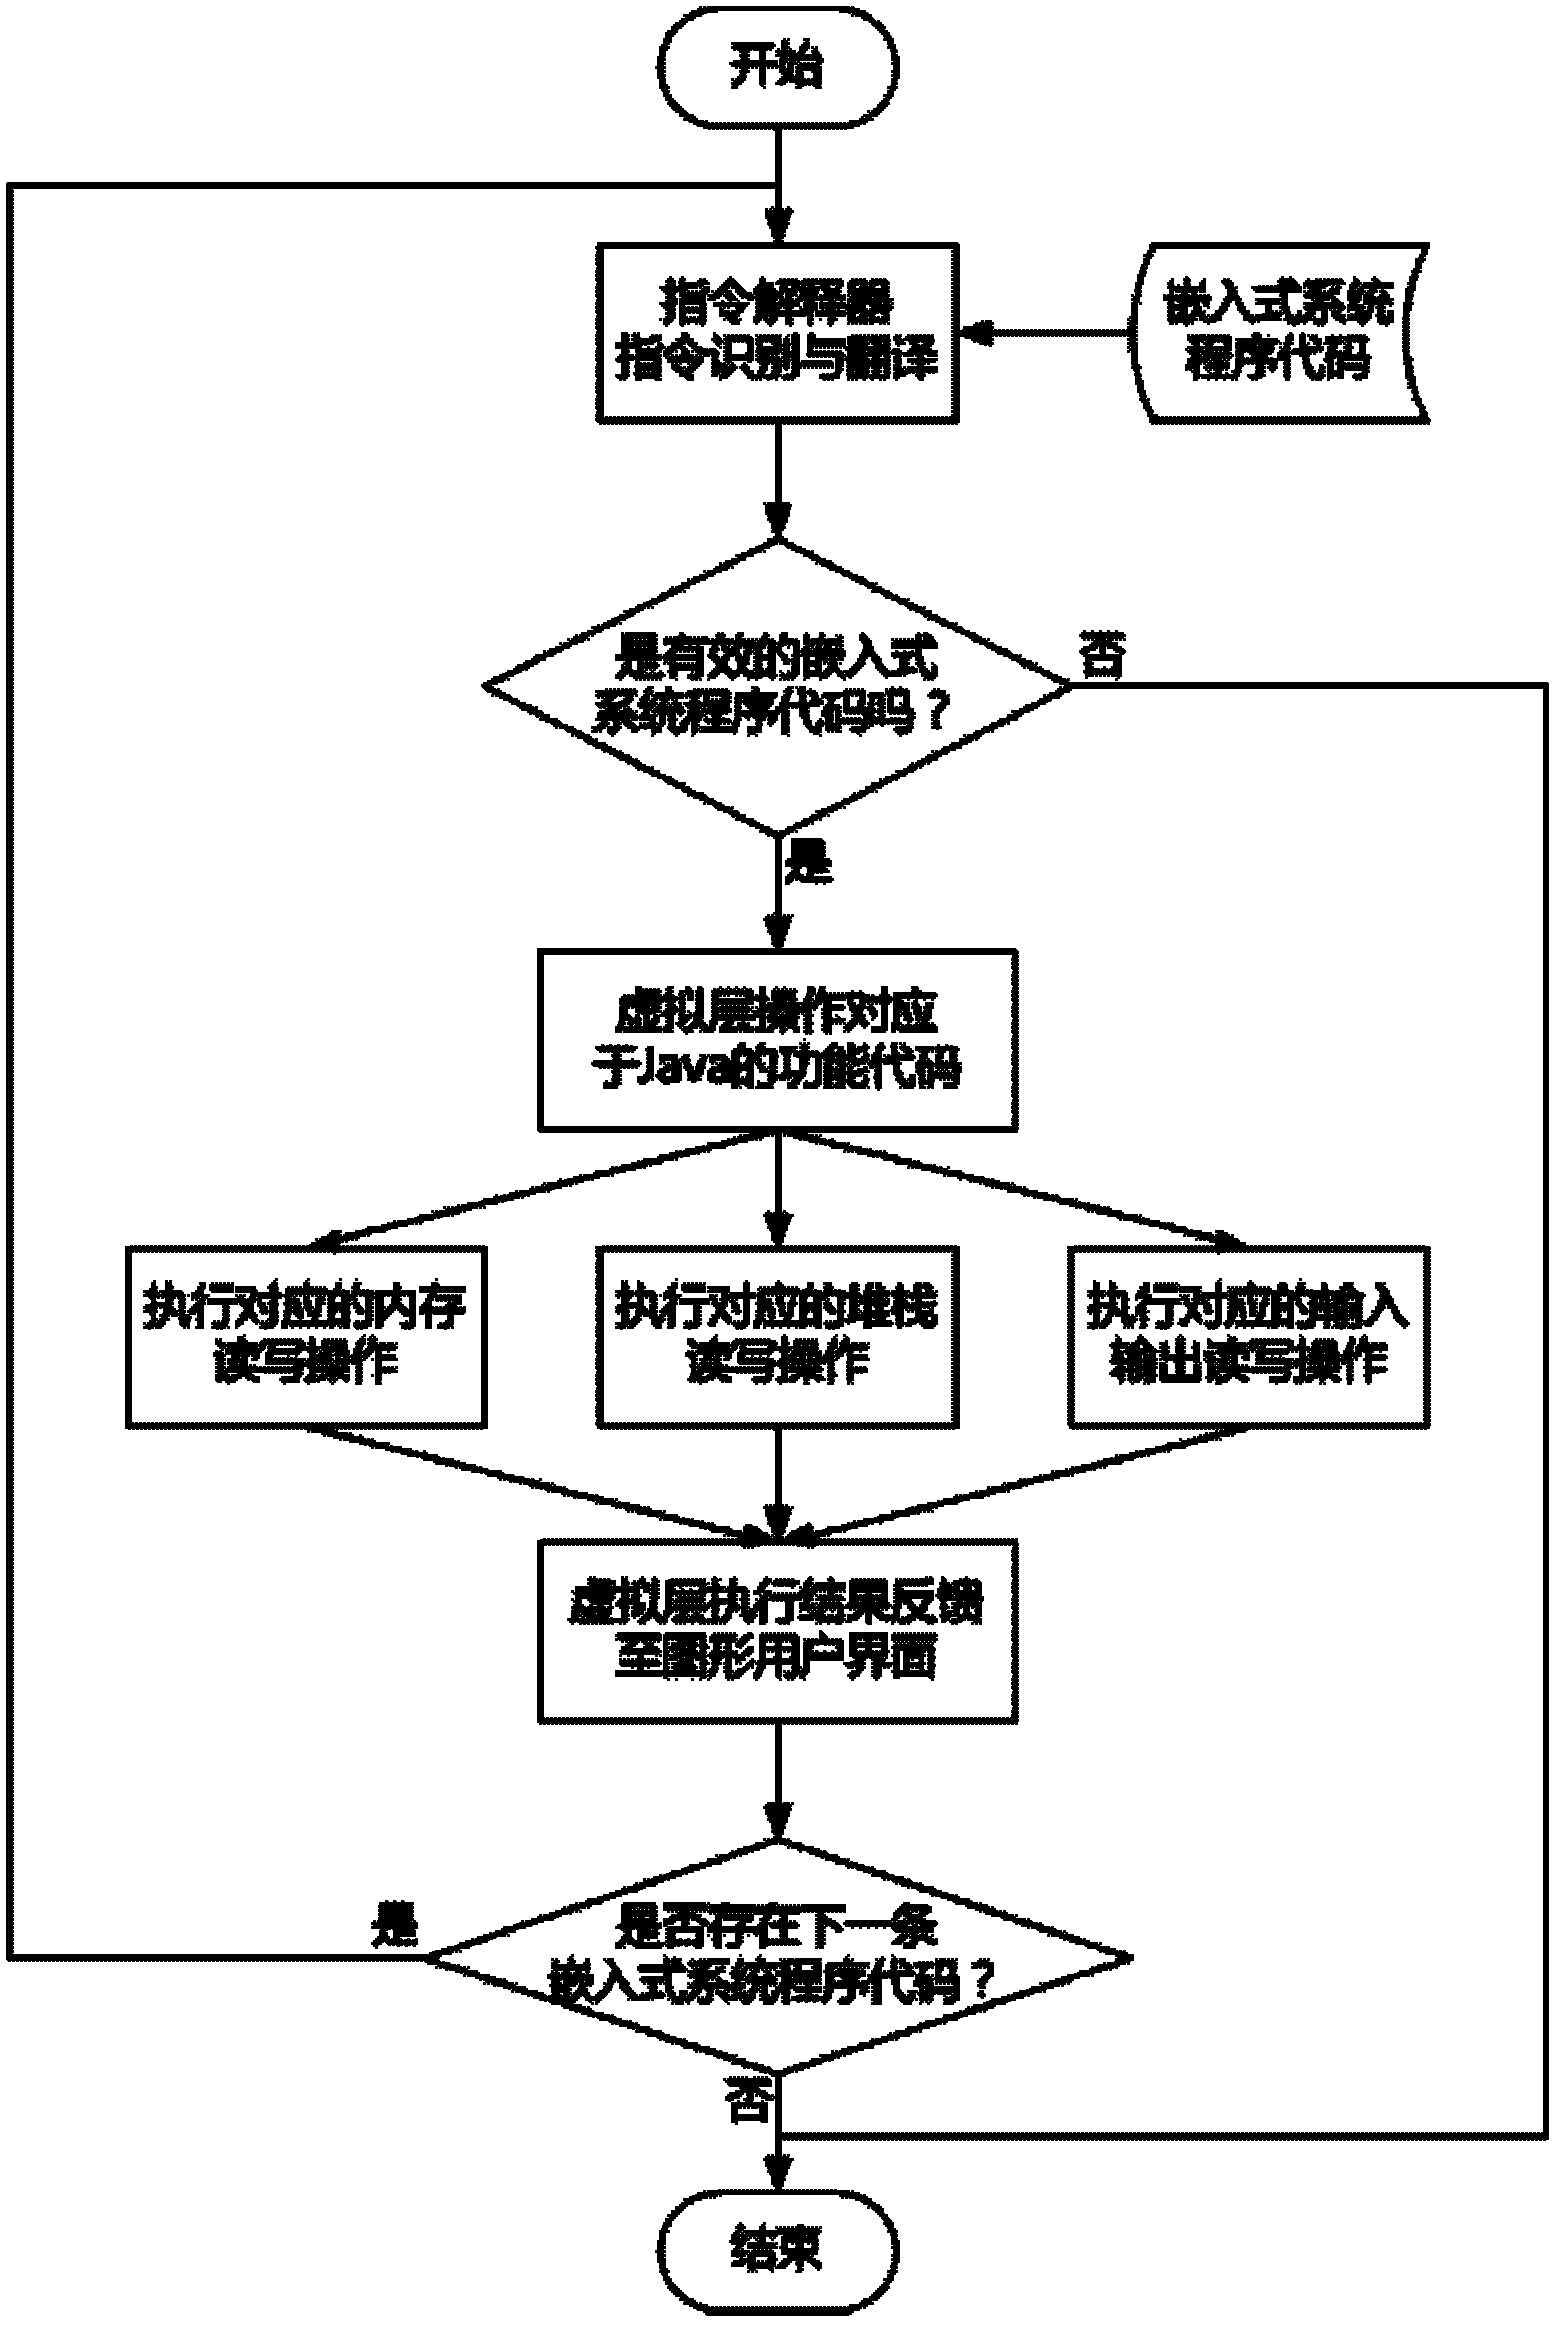 Method for realizing 8-bit embedded CPU (central processing unit) simulation running environment by aid of Java